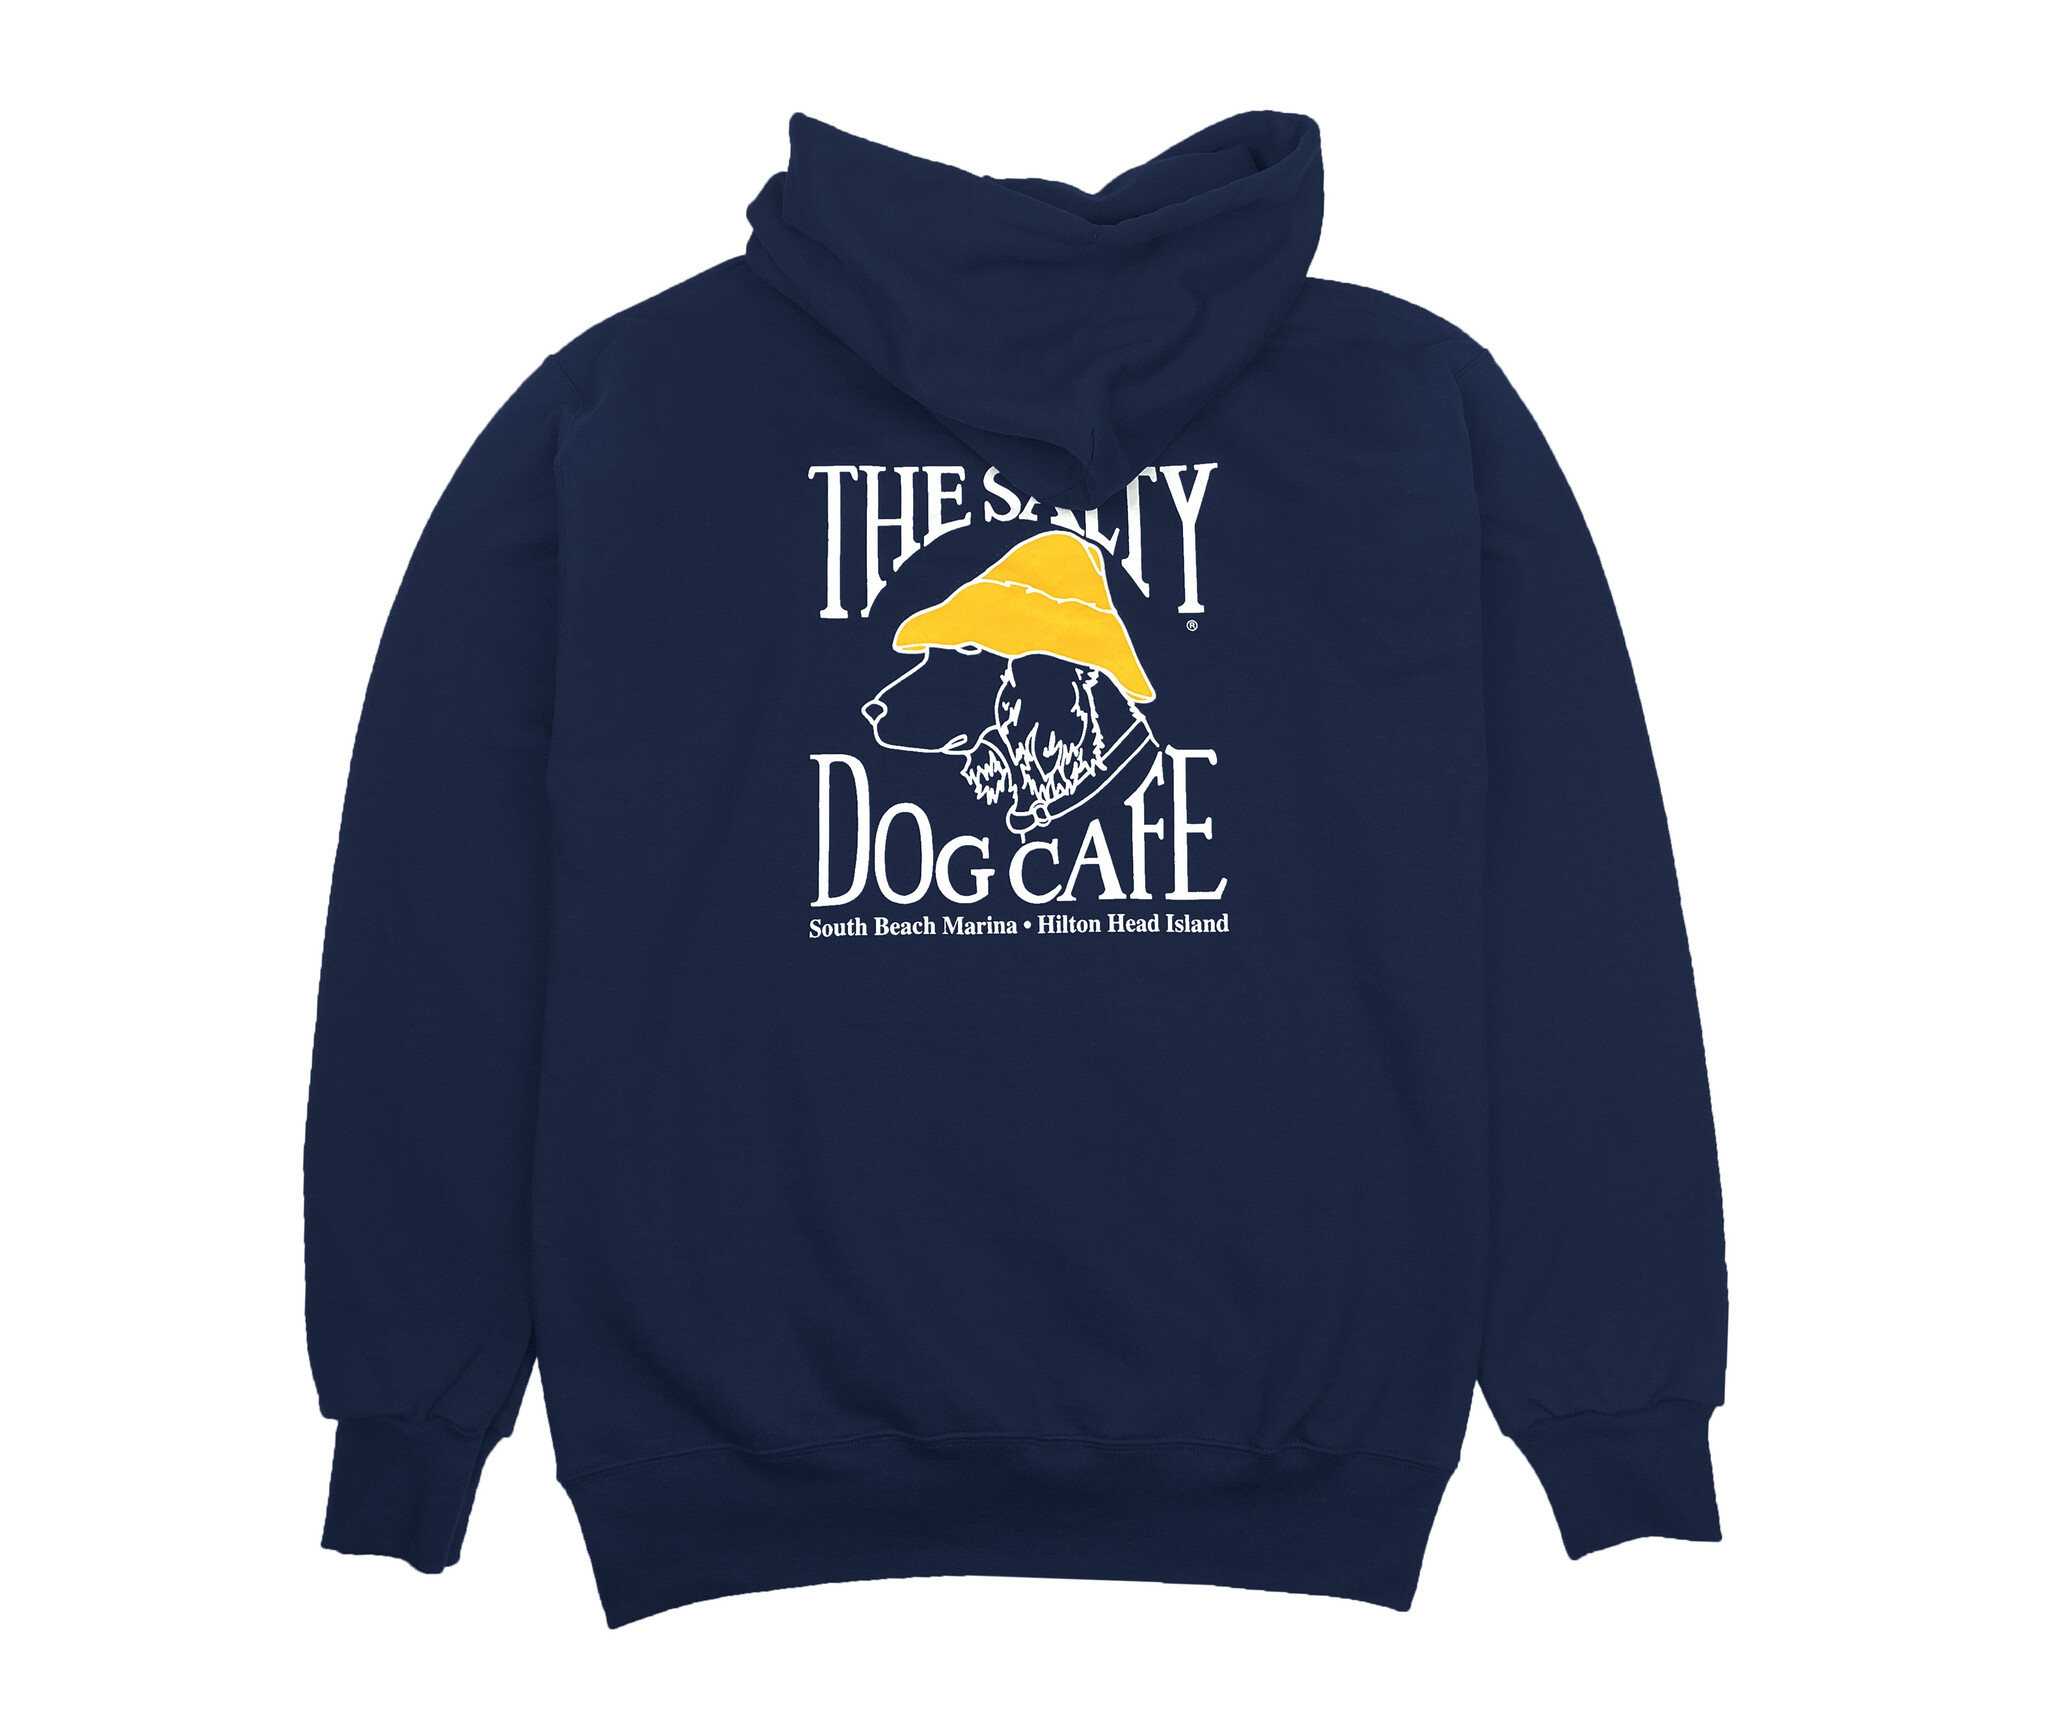 Hooded-Adult Navy